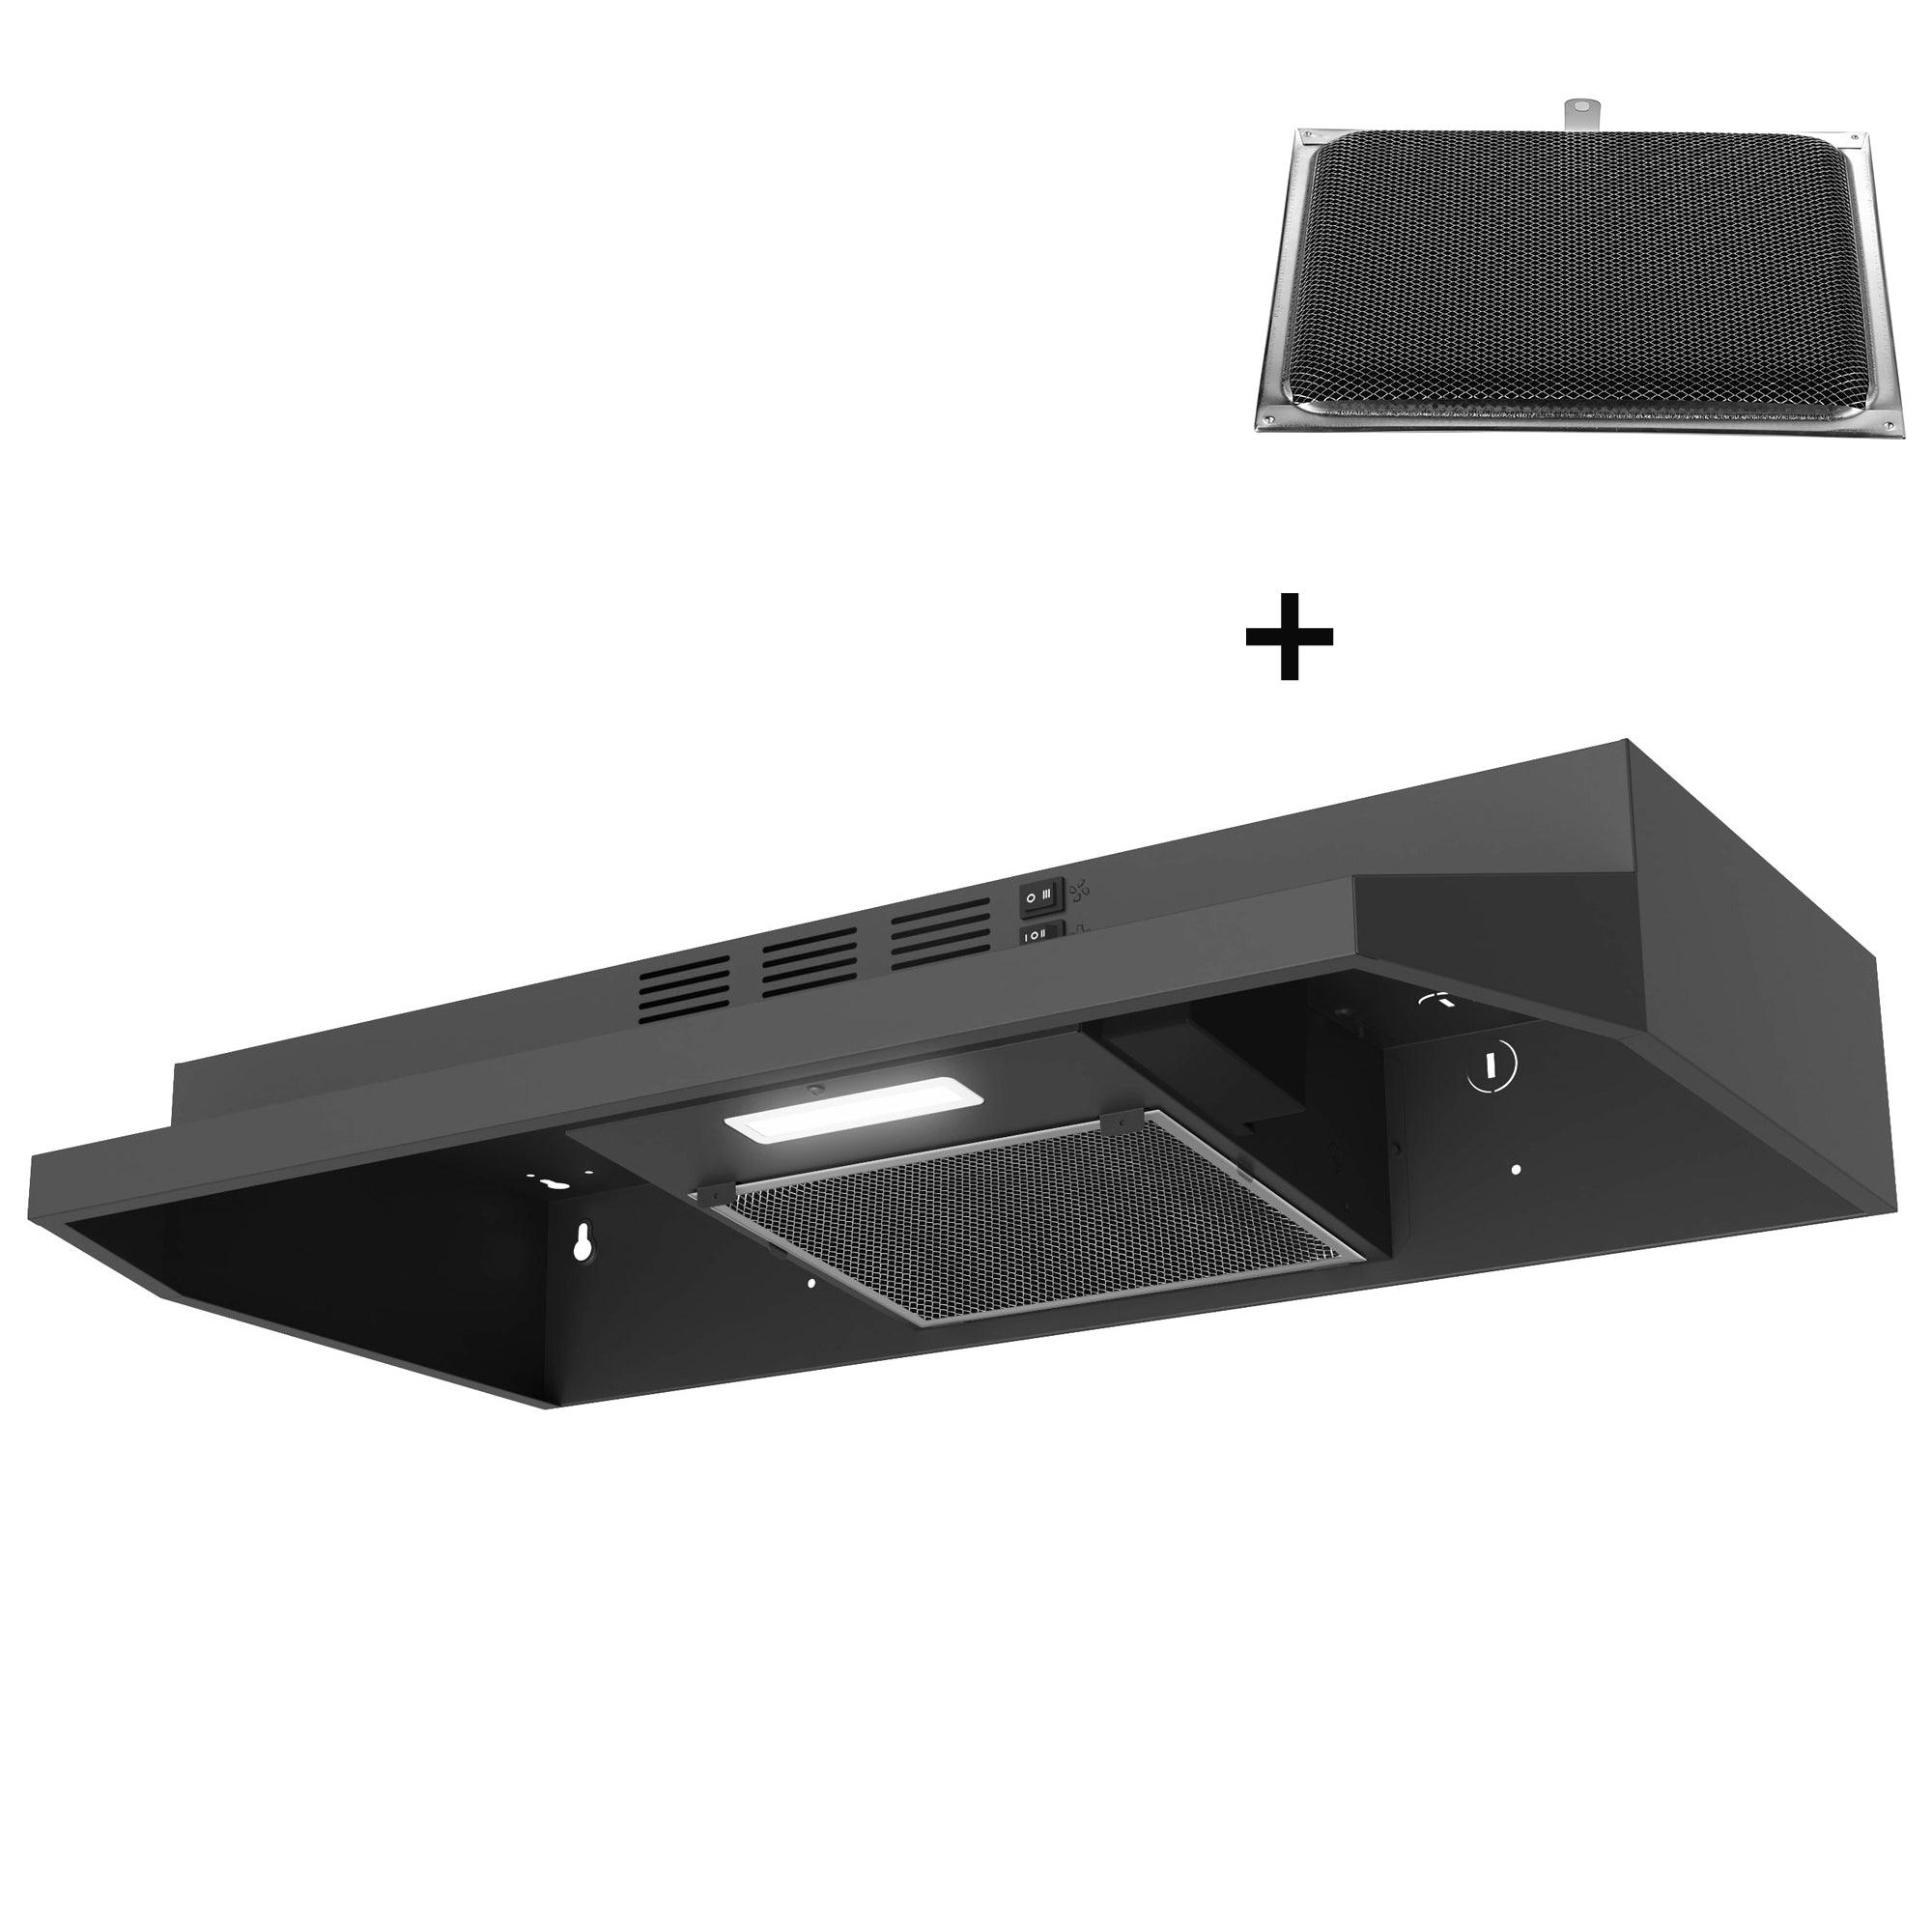 Tieasy Range Hood 30 inch 230 CFM Under Cabinet, Ducted/Ductless Black+Grease Filter(Ductless)